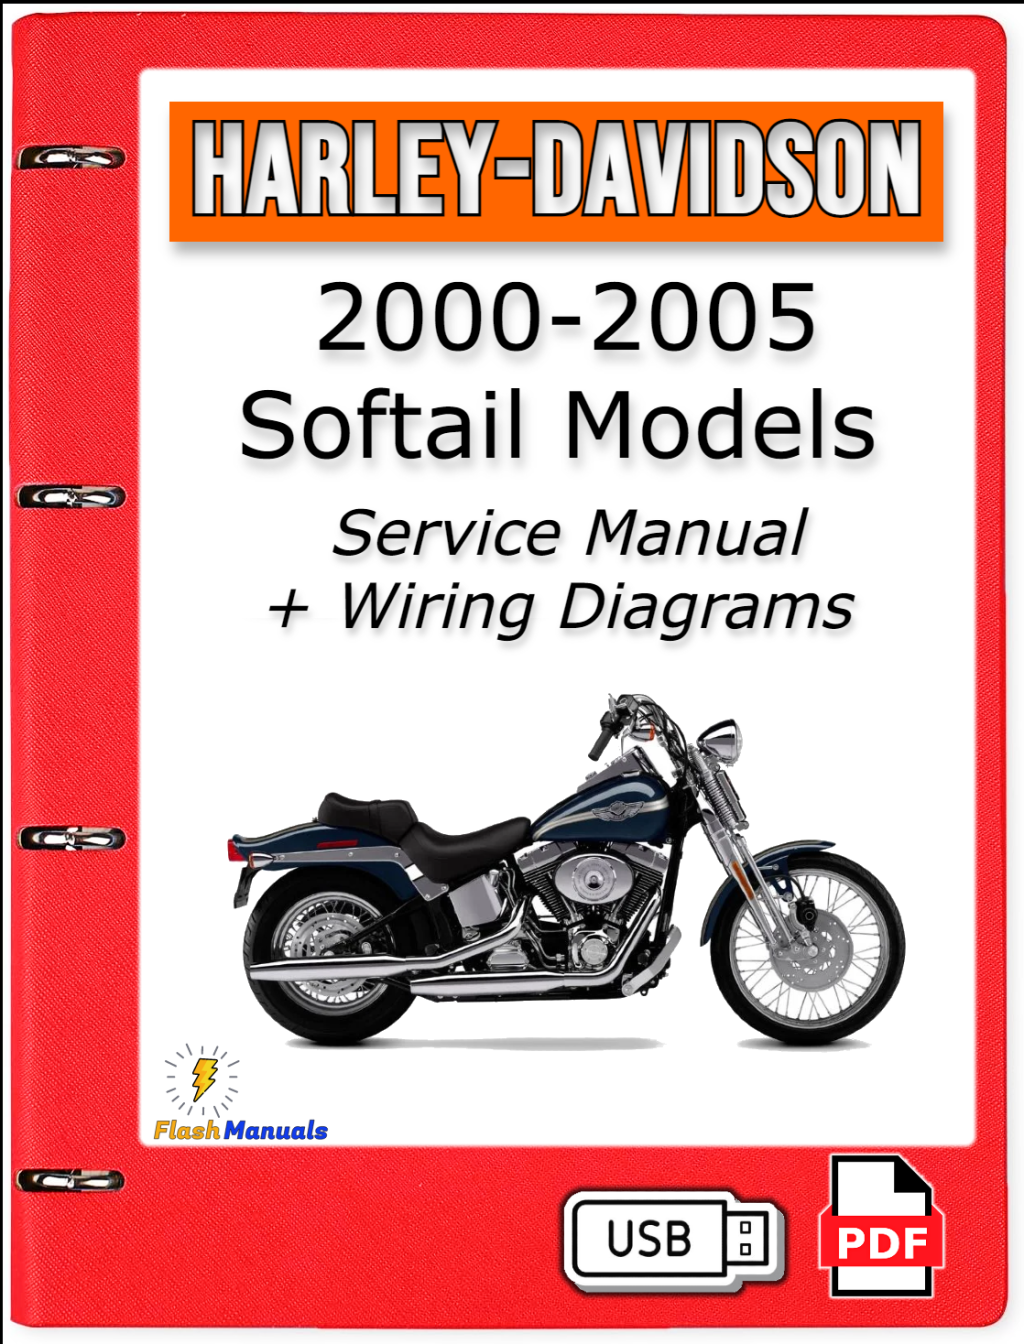 Picture of: – Harley Davidson Softail Models Service Manual + Wiring